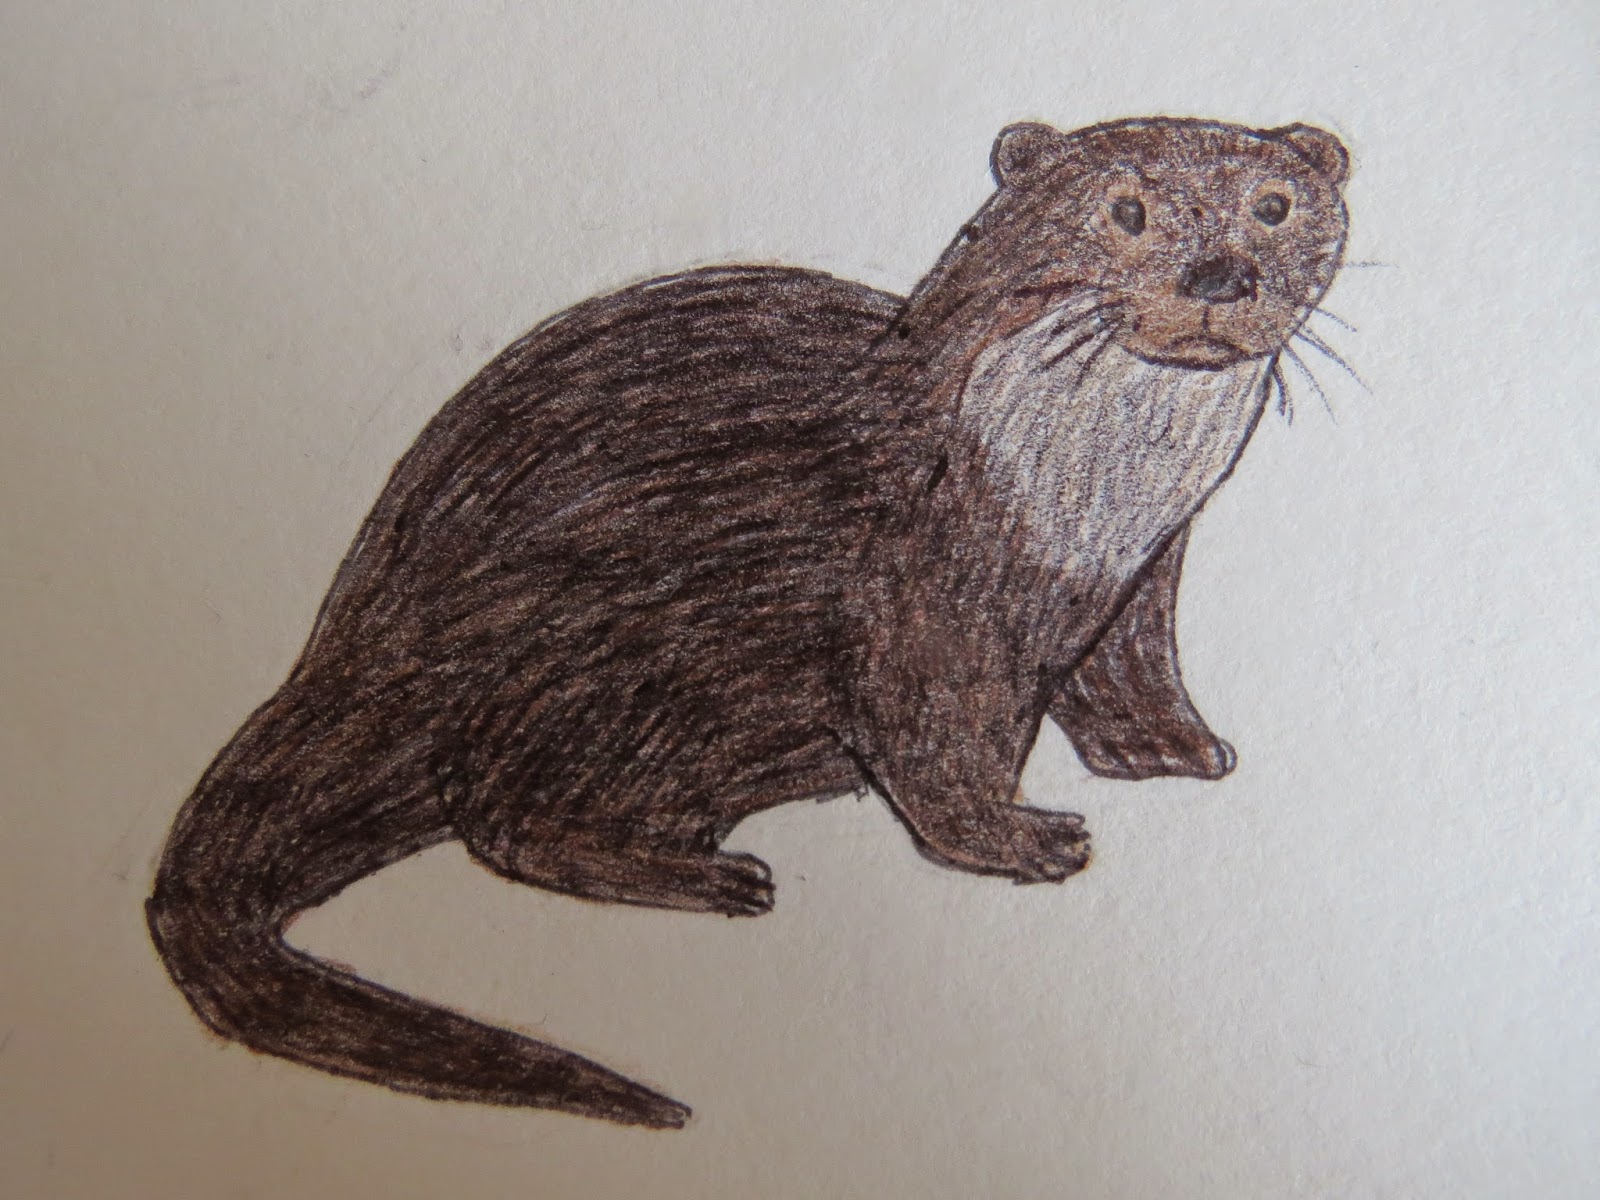 The Autistic Naturalist: How To Draw: Otters